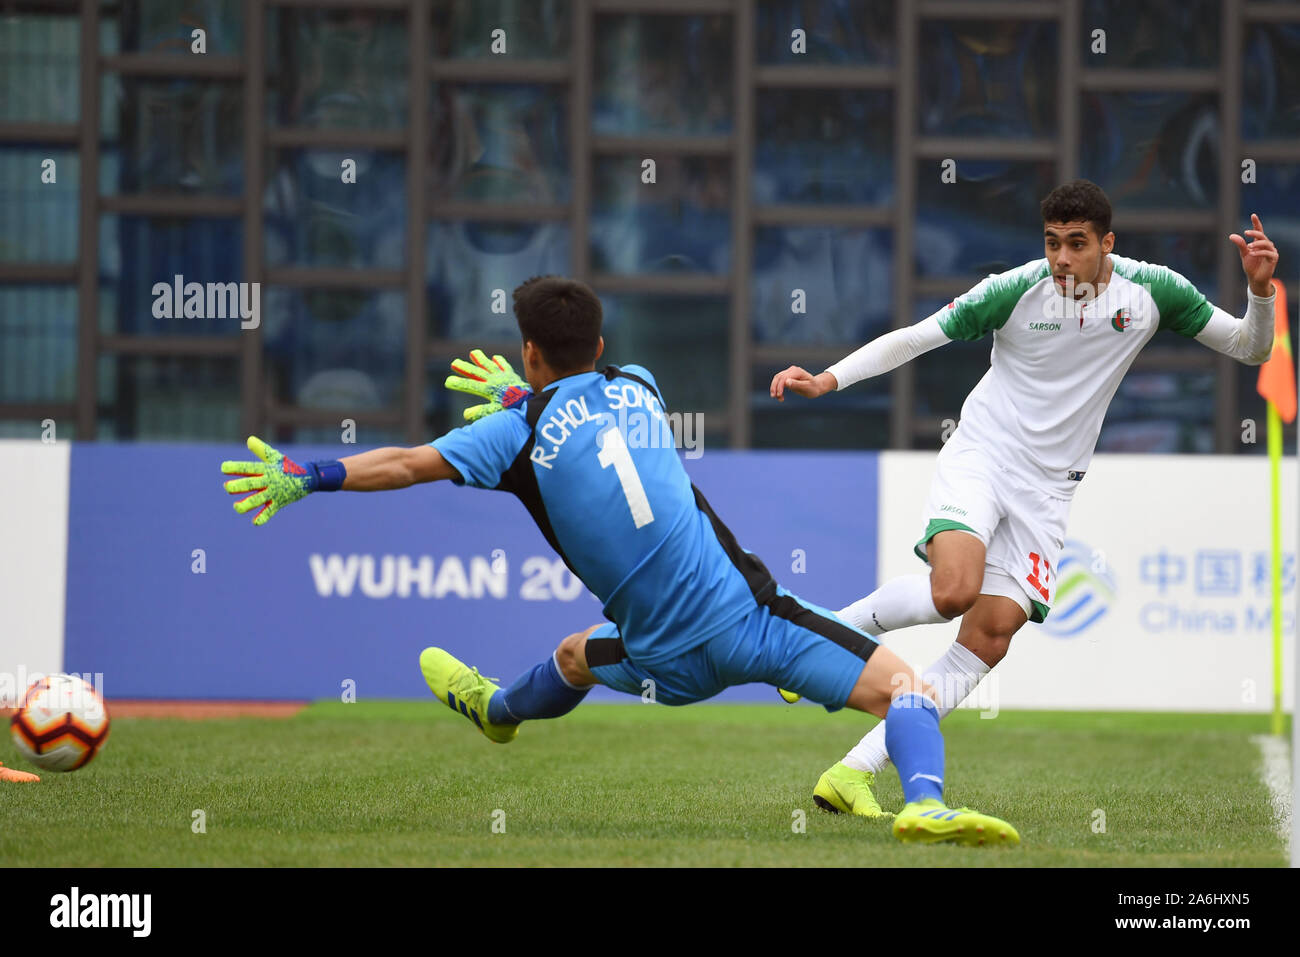 Wuhan, China. 27th Oct, 2019. Goalkeeper Ri Chol Song (L) of the Democratic People's Republic of Korea (DPRK) makes a save during the men's football bronze medal match between Algeria and the DPRK at the 7th International Military Sports Council (CISM) Military World Games in Wuhan, capital of central China, Oct. 27, 2019. Credit: Li Ga/Xinhua/Alamy Live News Stock Photo